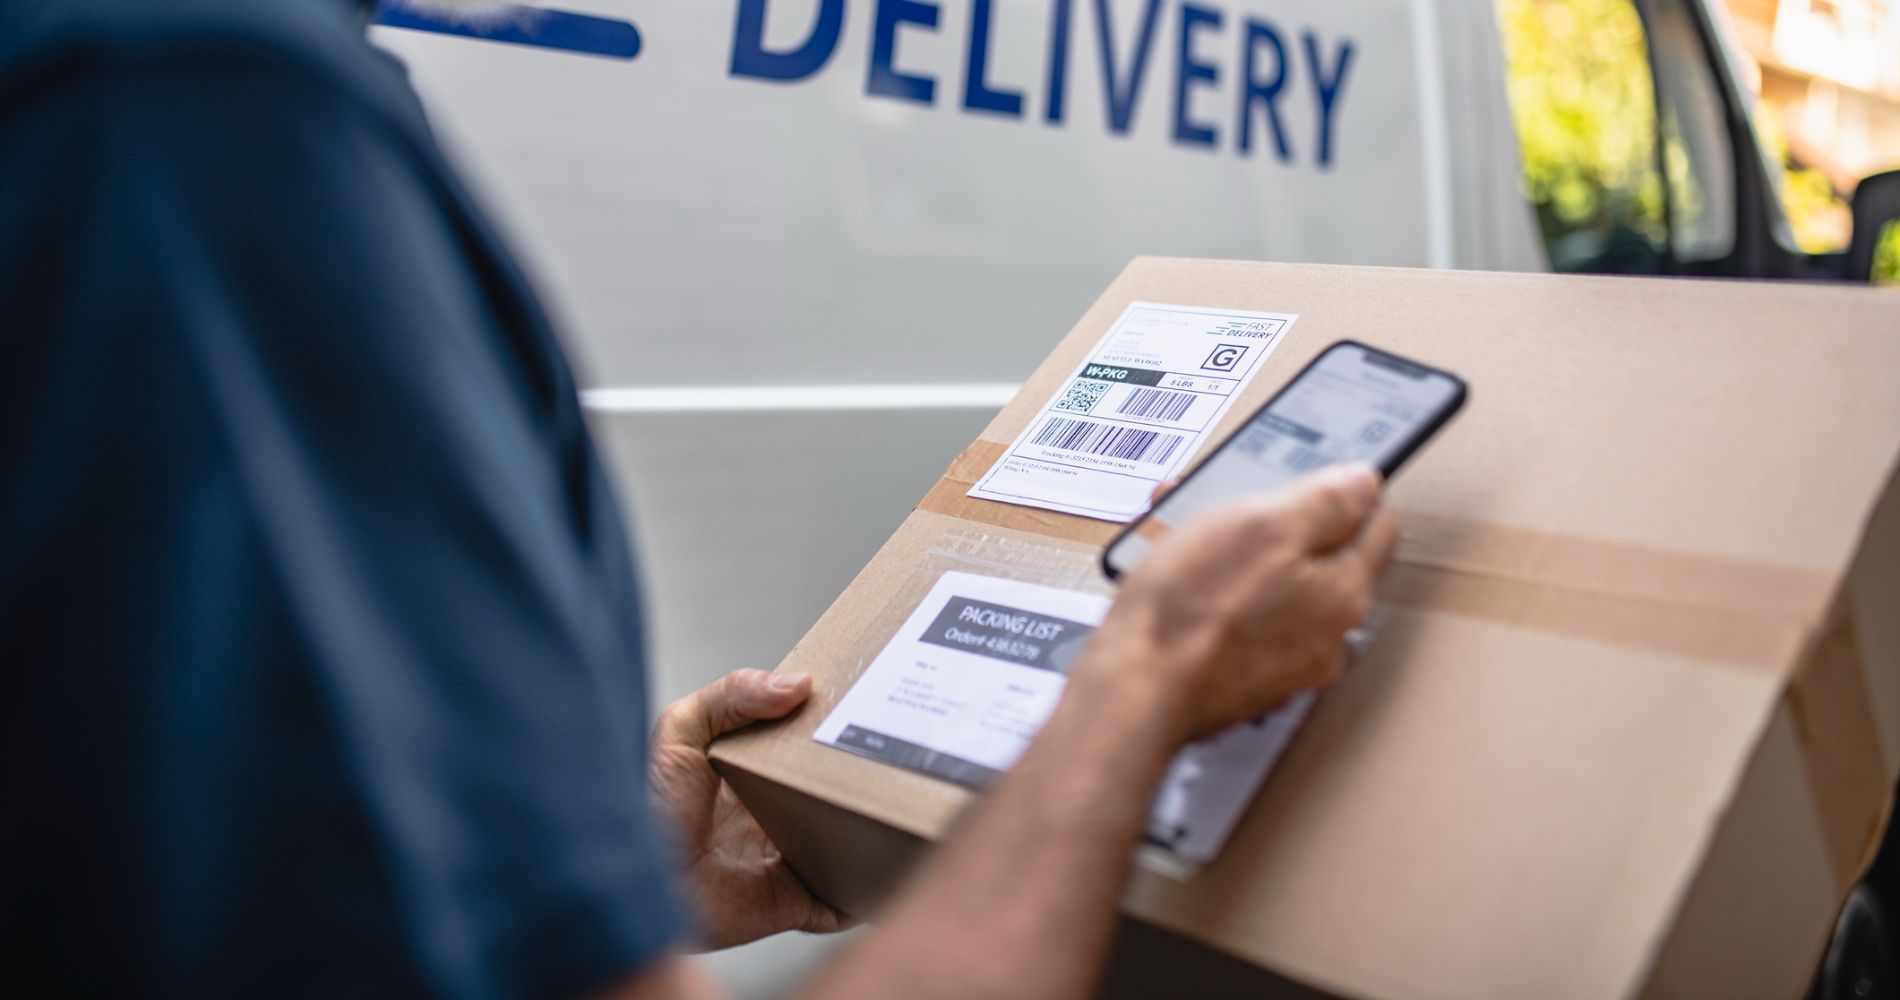 82% of delivery drivers using smartphones as operational tools, data shows